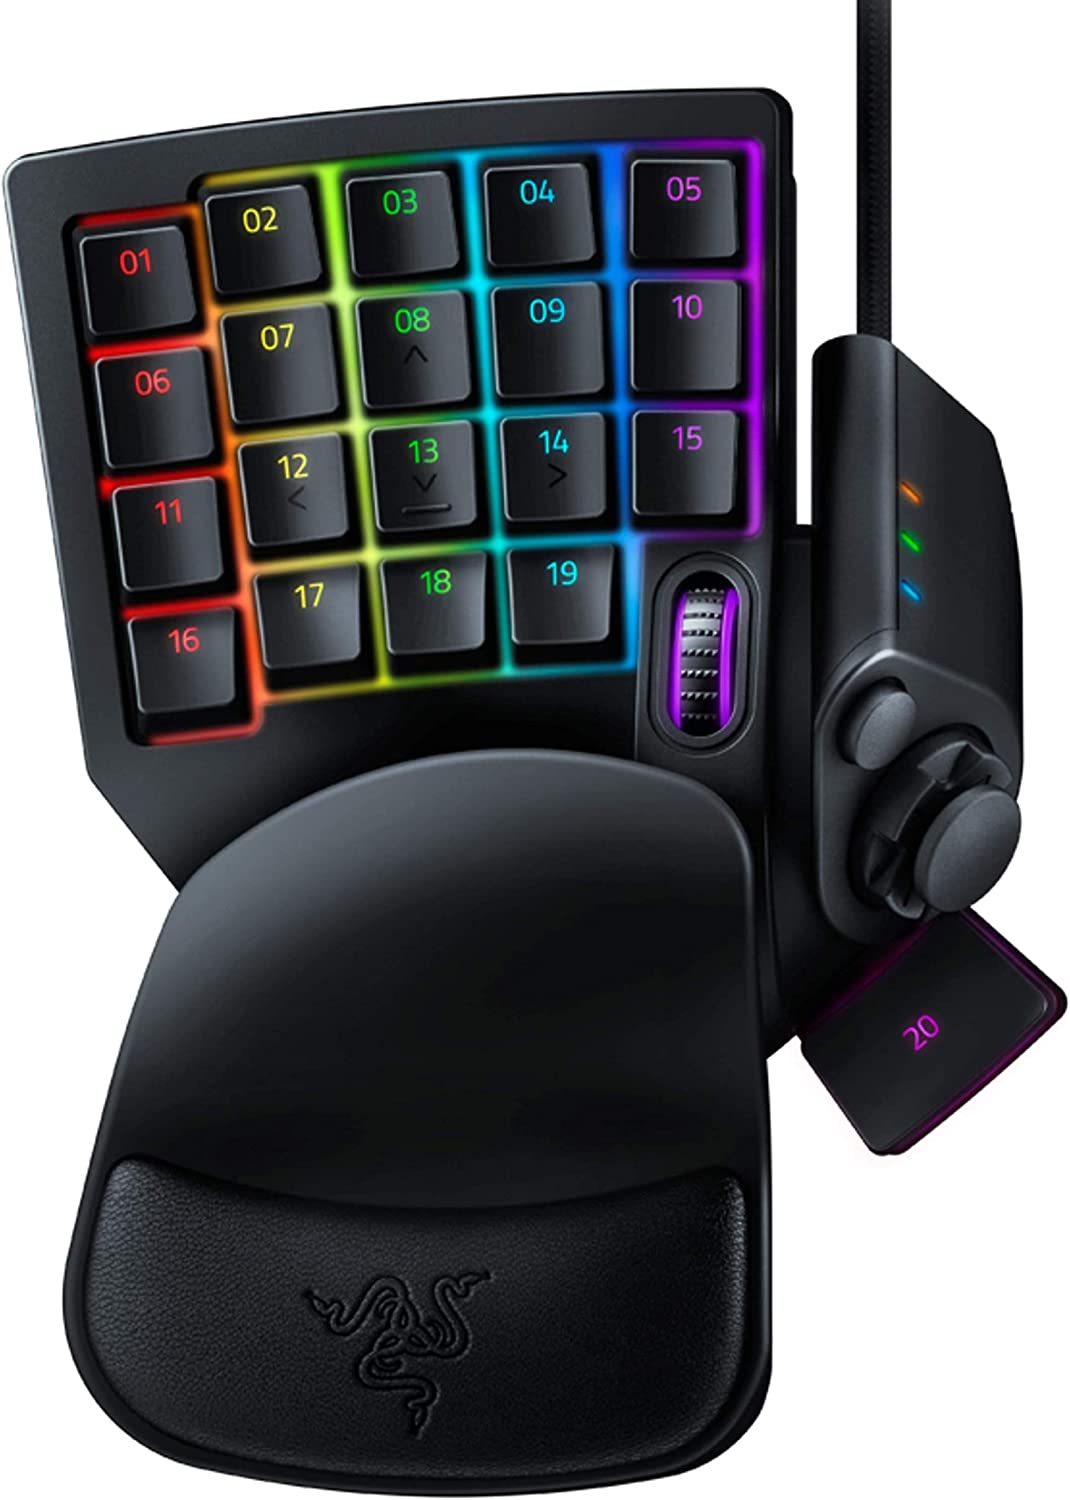 If competitive gaming is a priority then a gaming keypad would be better vs. a keyboard.